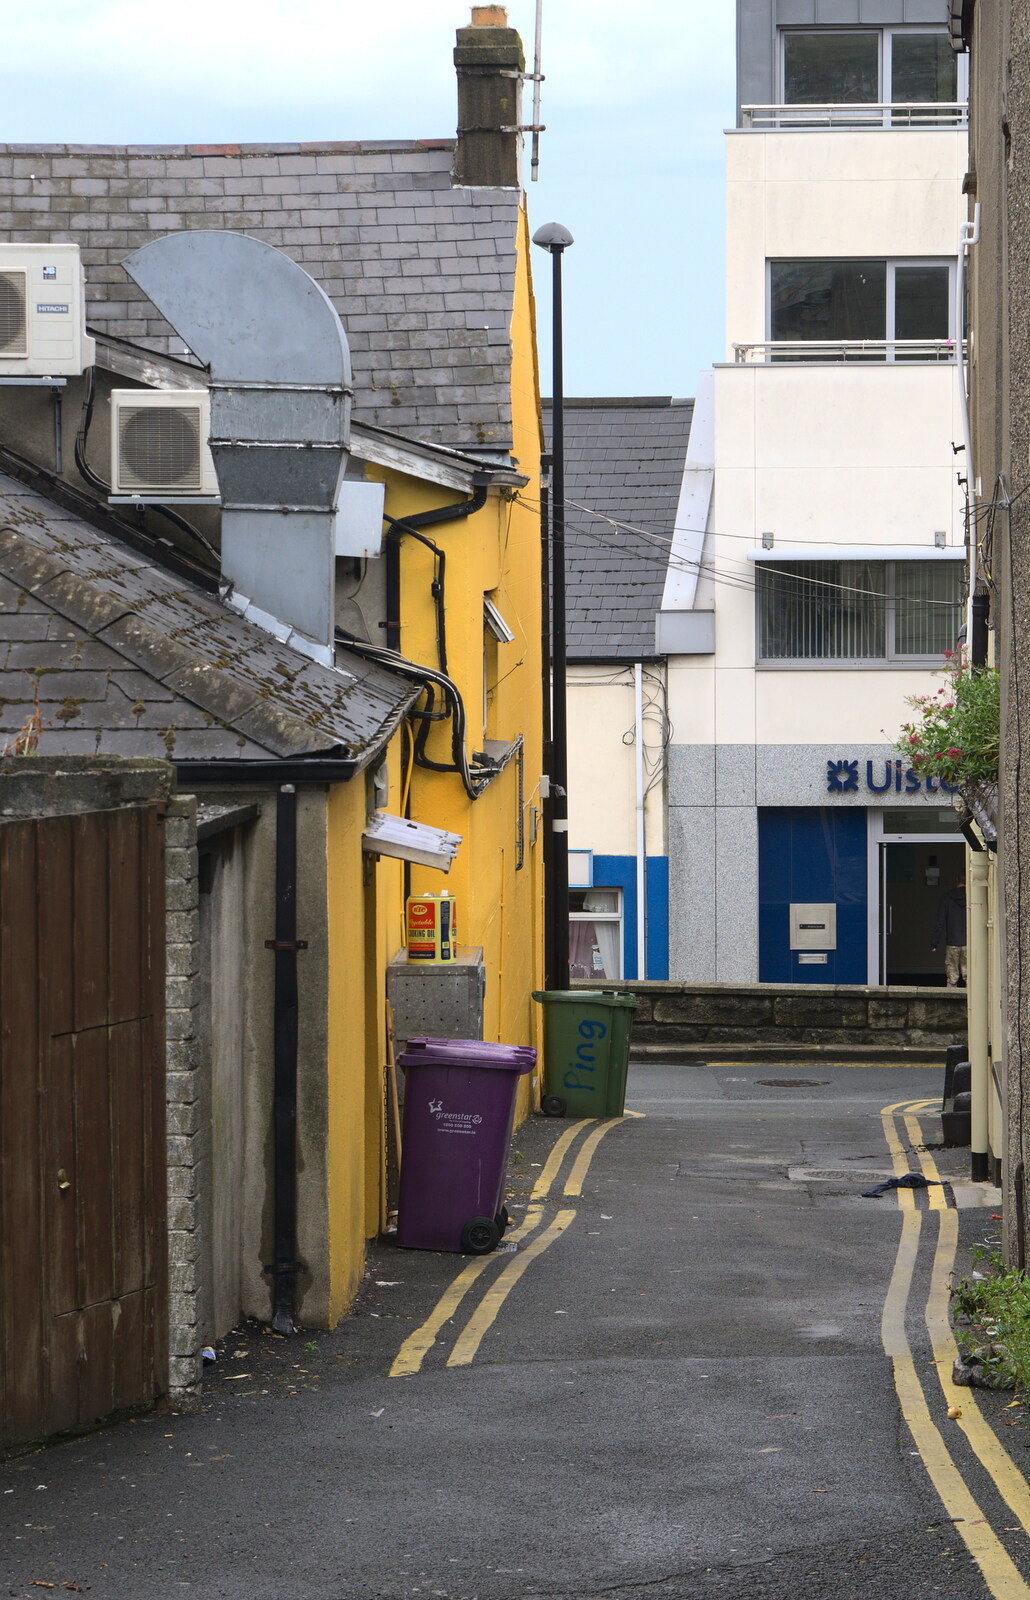 A side street from Camping at Silver Strand, Wicklow, County Wicklow, Ireland - 7th August 2014